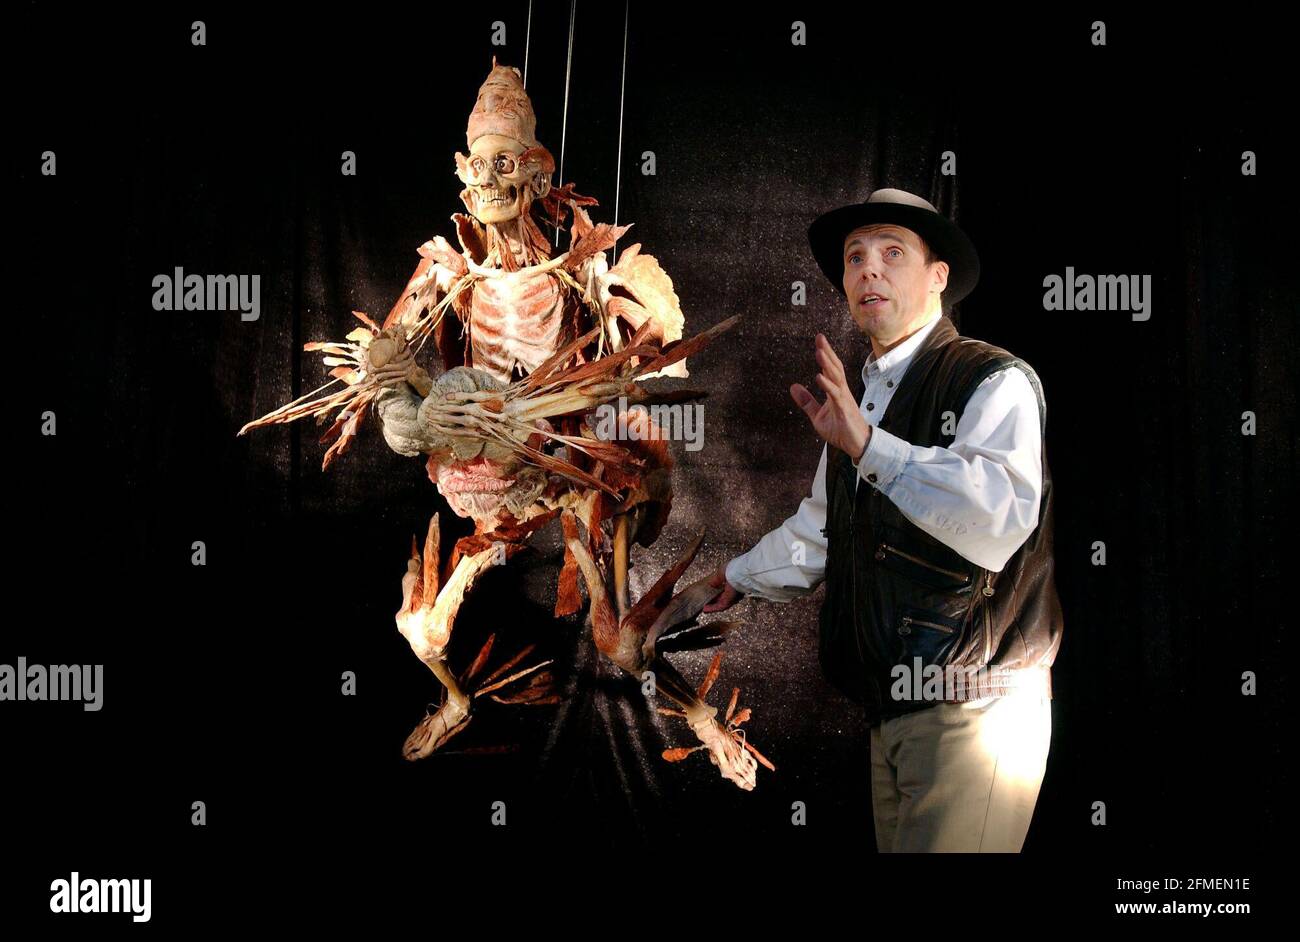 Professor Gunter von Hagens july 2002Professor Gunther von  Hagens with one of his new works entitled 'Mystical Plastinate' at the 'Body Worlds' exhibition at the Atlantis Gallery in Brick Lane. 12 July 2002 photo Andy Paradise Stock Photo